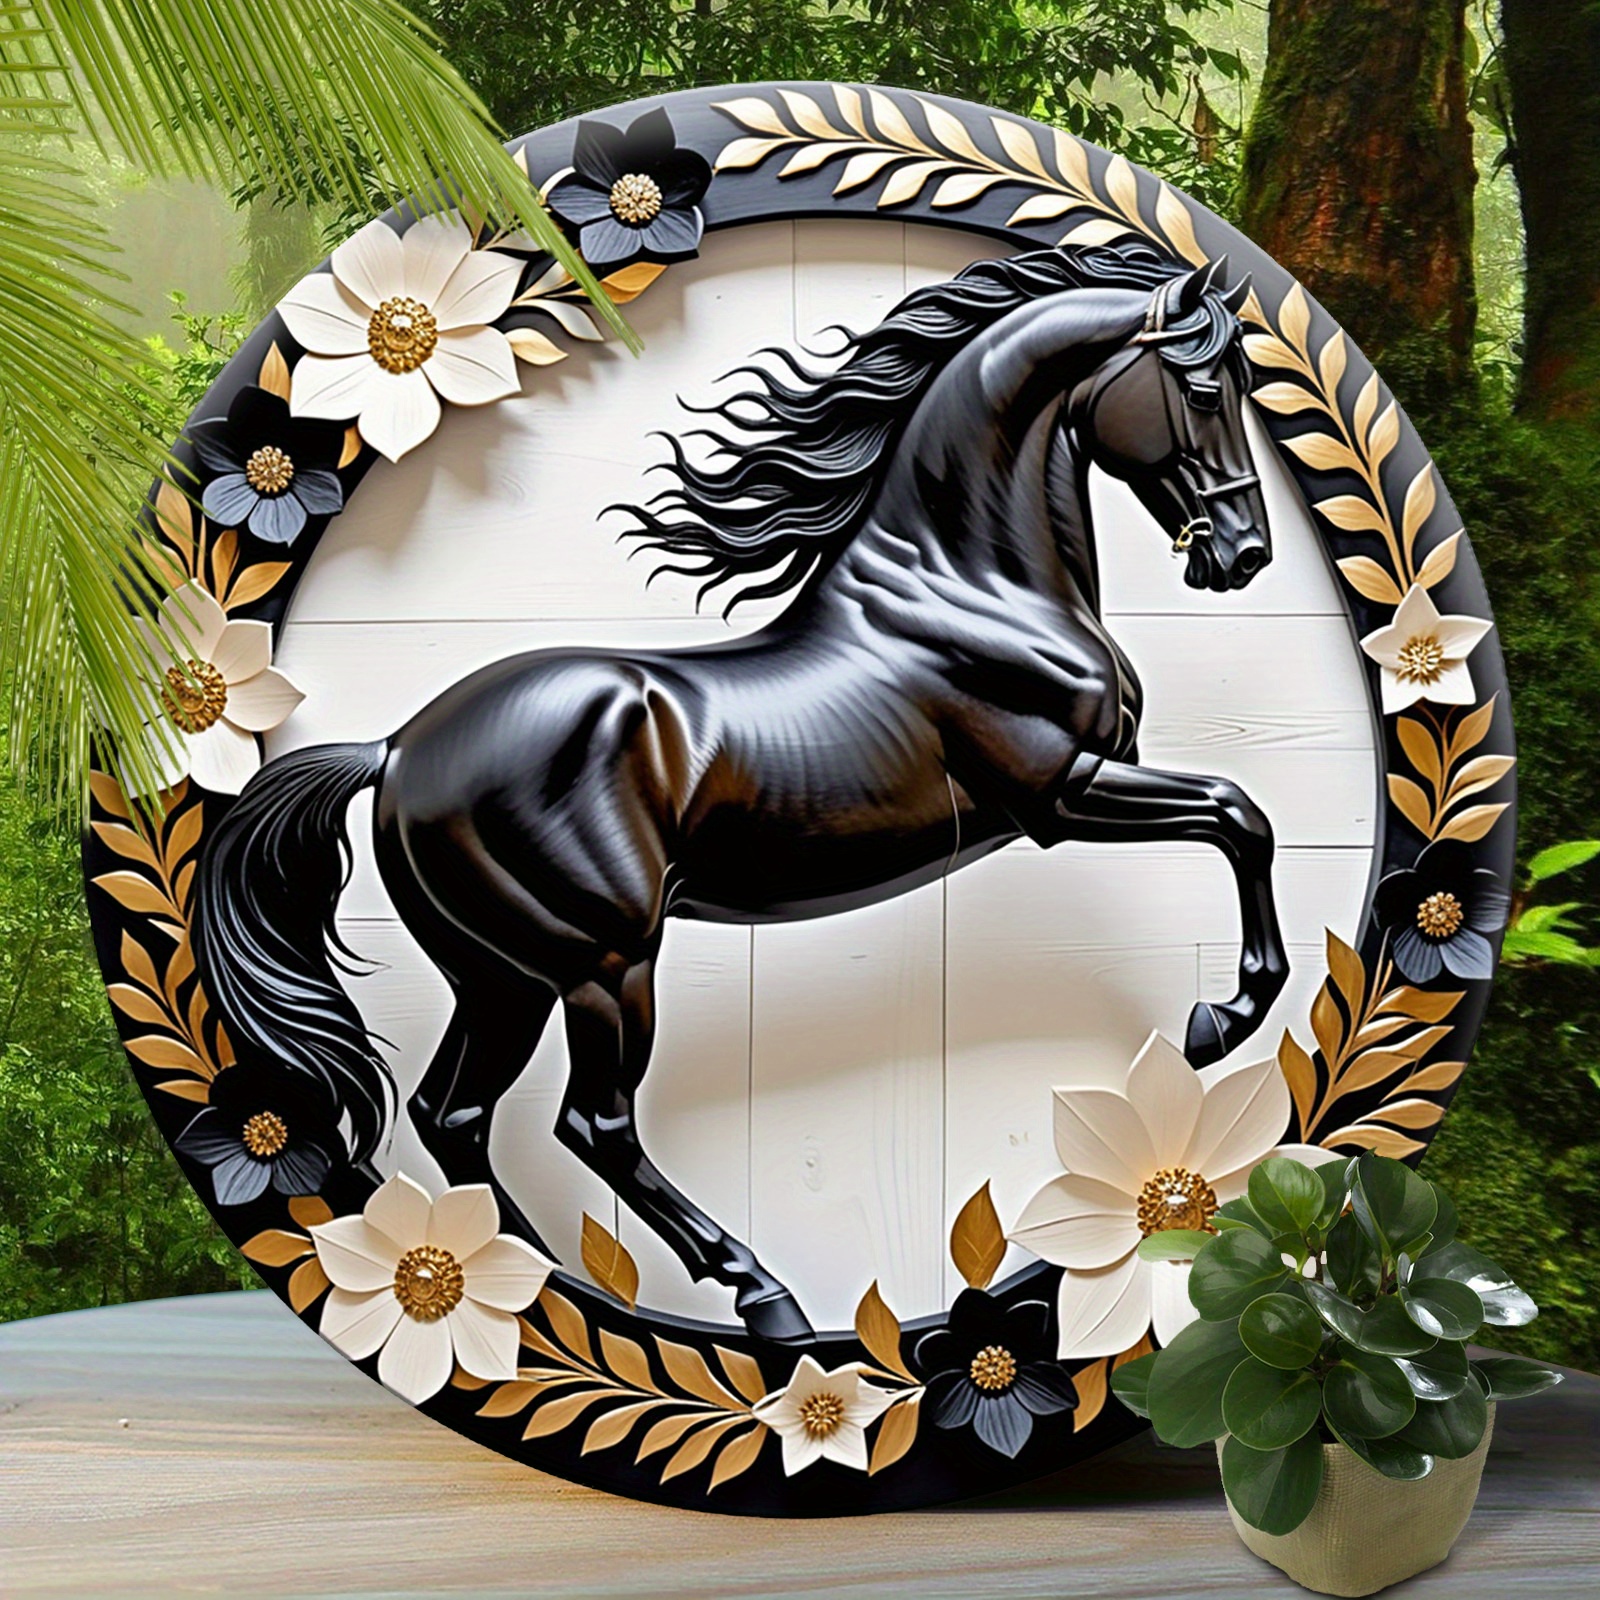 

1pc Aluminum Black Horse And Floral Wall Art Decor - Easy To Install 2d Round Sign For Home, Cafe, Bedroom, Living Room - Aesthetic Elegant Artwork With Pre-drilled Holes, Holiday Gift Idea